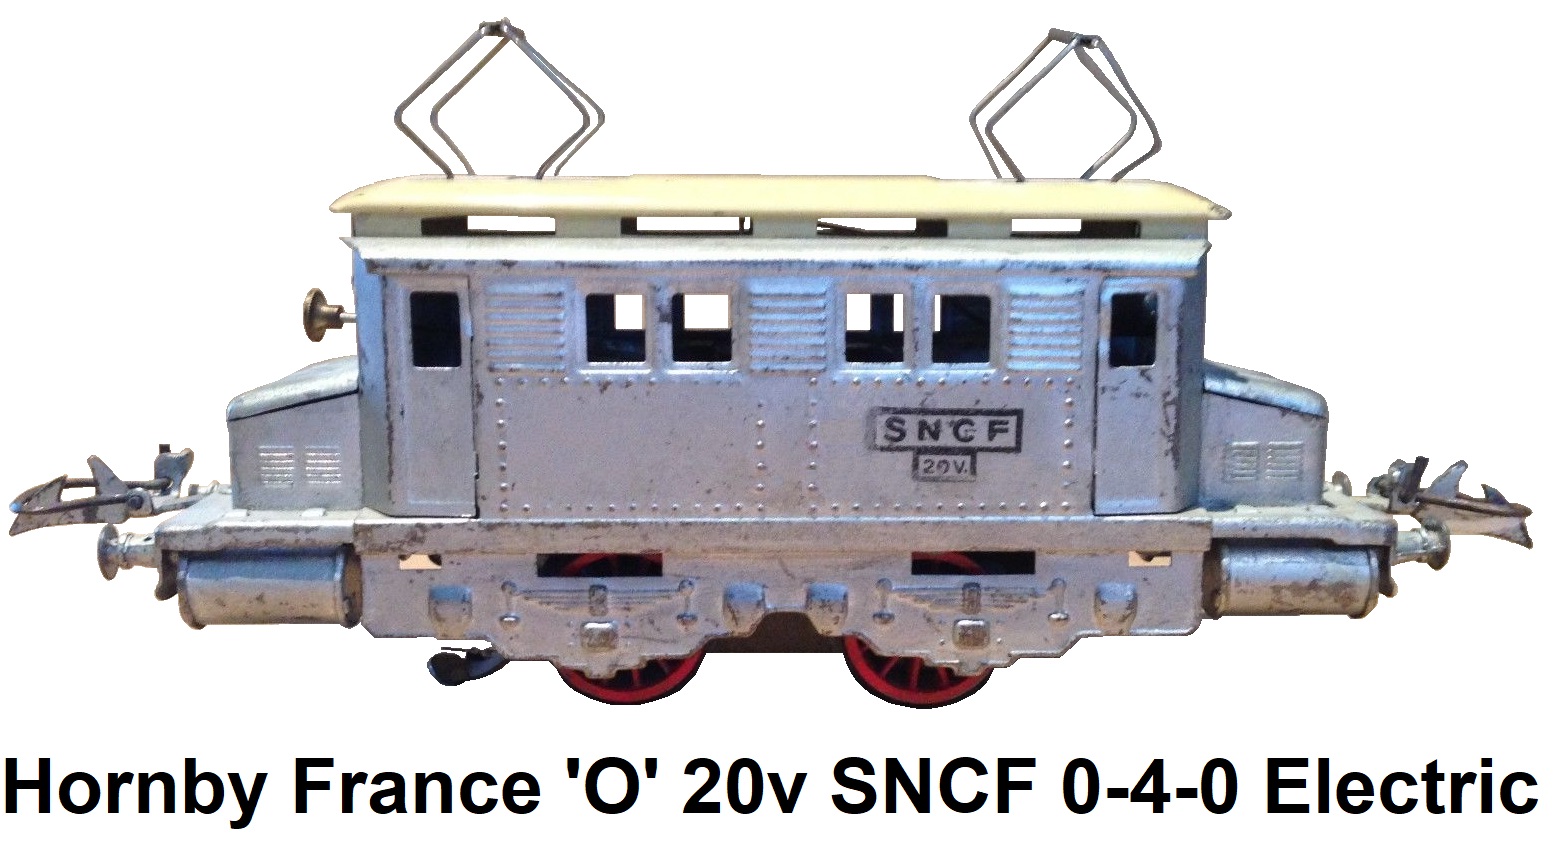 Hornby 'O' gauge French 20v Electric SNCF Silver 0-4-0 with overhead pantographs